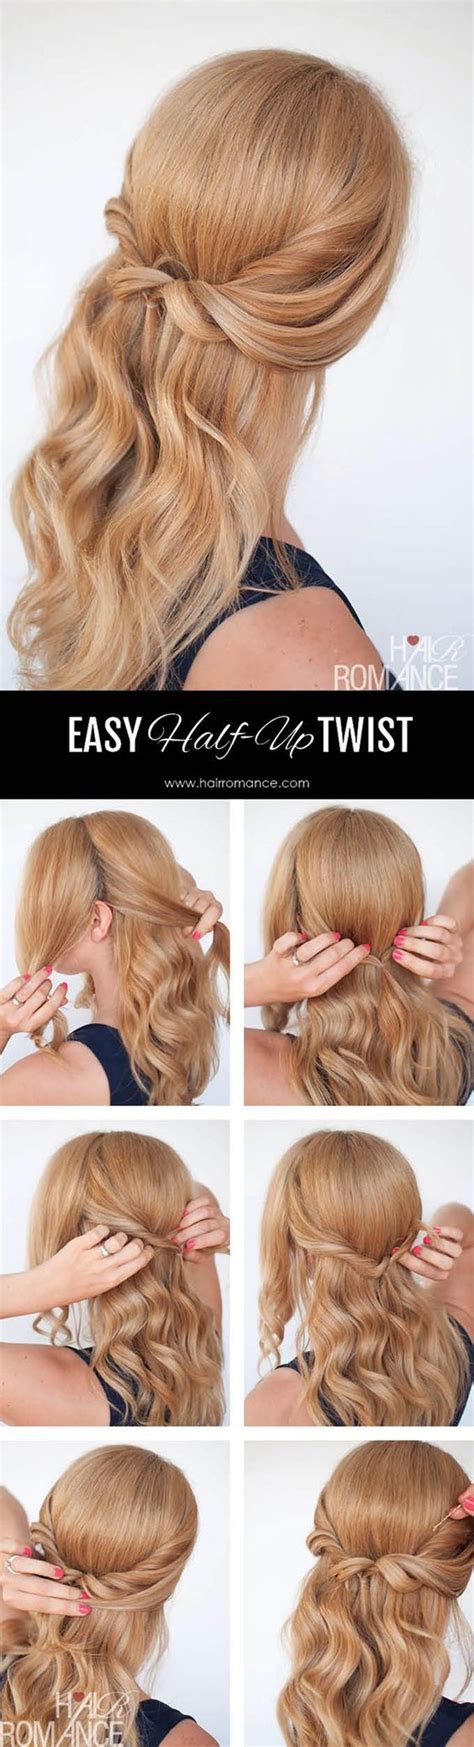 Hairstyles picture » the world's biggest beauty society to find solutions to all your beauty queries and keep up with the latest beauty trends. 40 Easy Hairstyles for Schools to Try in 2016